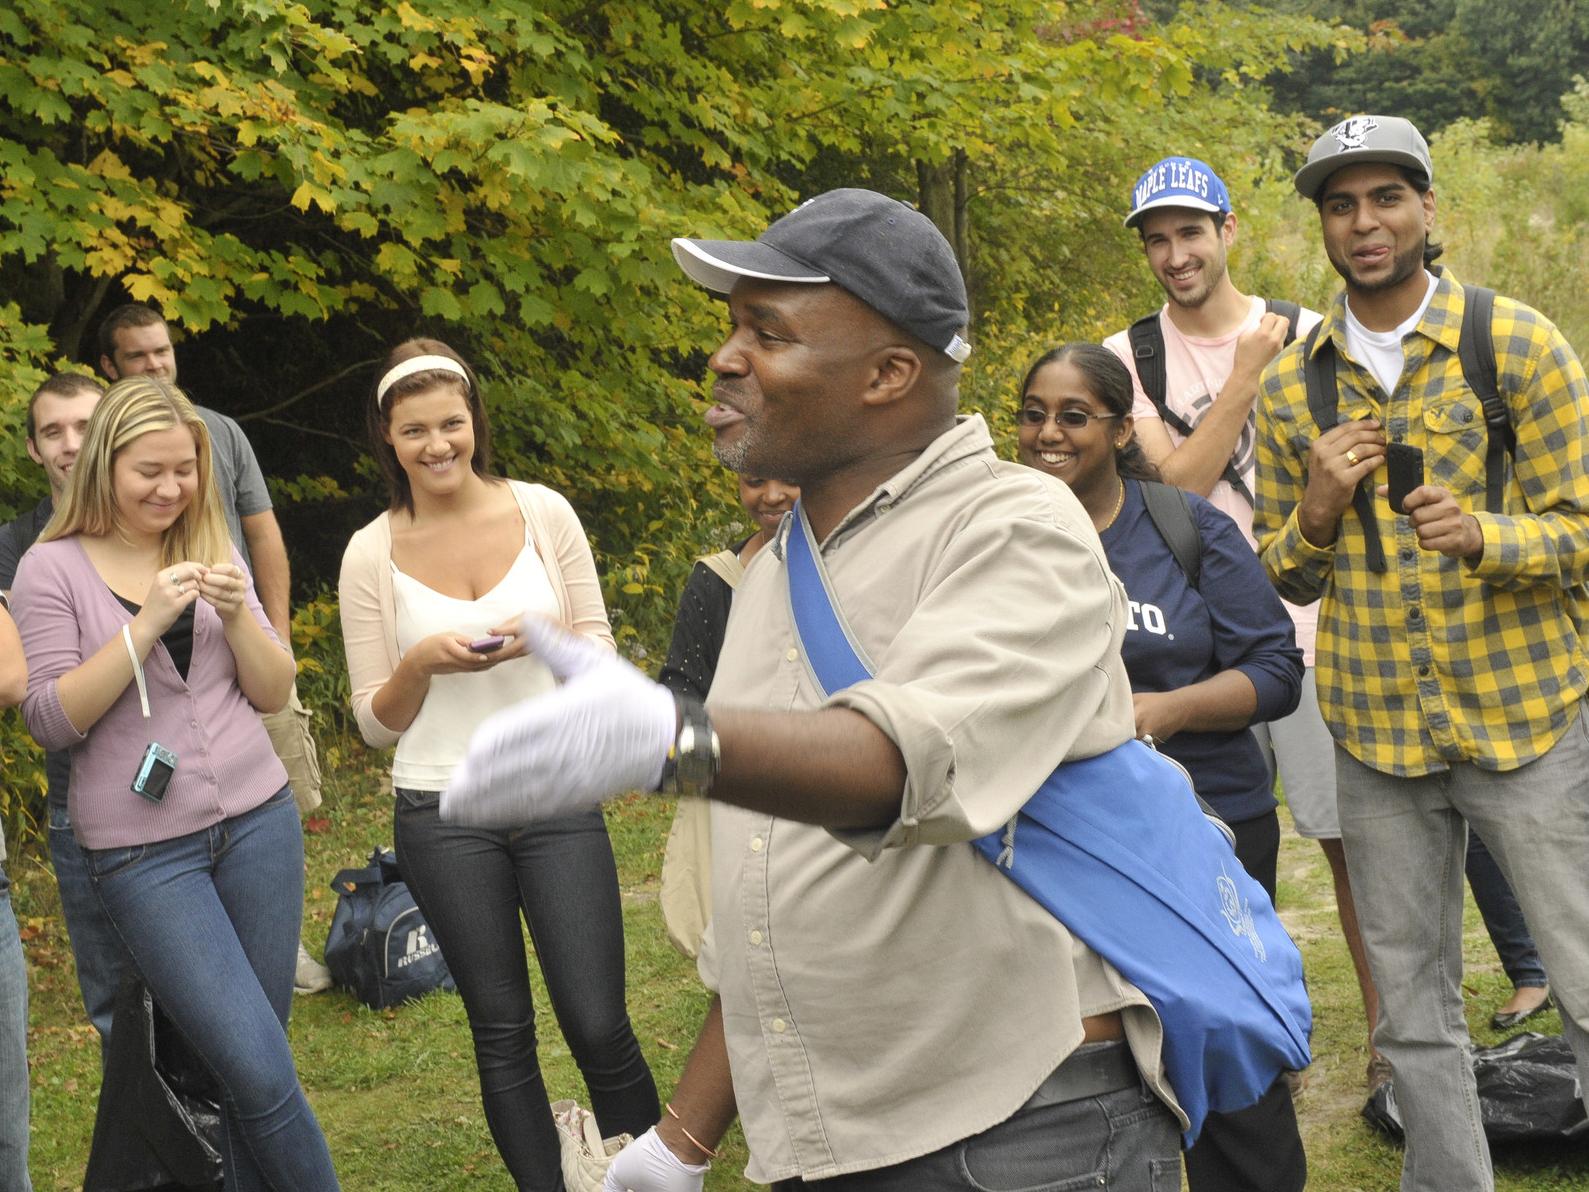 Professor Thembela Kepe with a group of students in a field setting with trees and grass